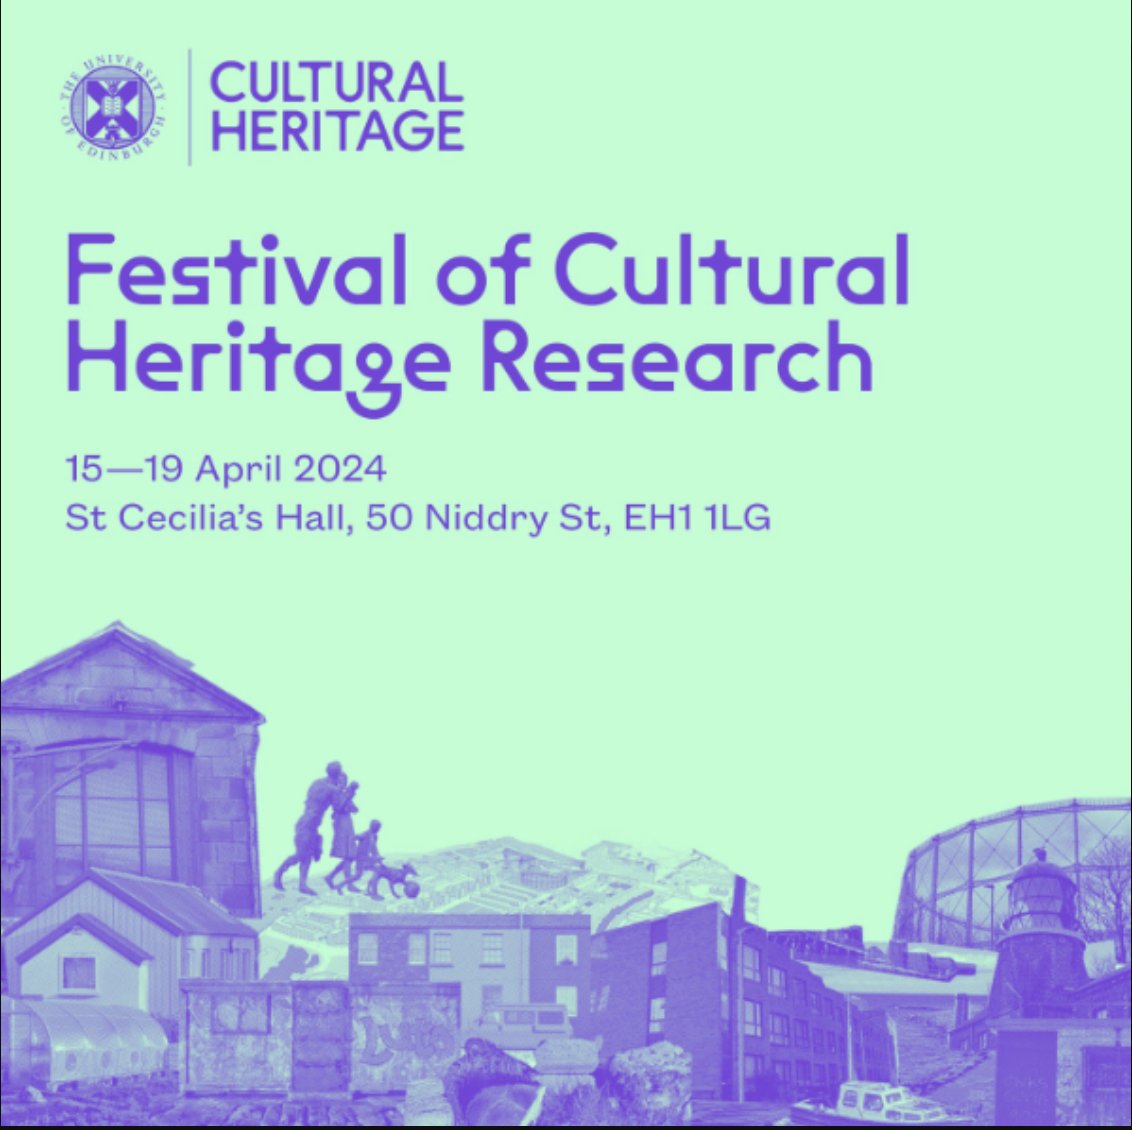 Please join us for the Cultural Heritage Festival next week! For more information: blogs.ed.ac.uk/heritagefestiv… @Una_Europa @EdinUniCAHSSres @uoessps @UoE_STIS @granton_hub @StCeciliasHall @EdUniLibraries